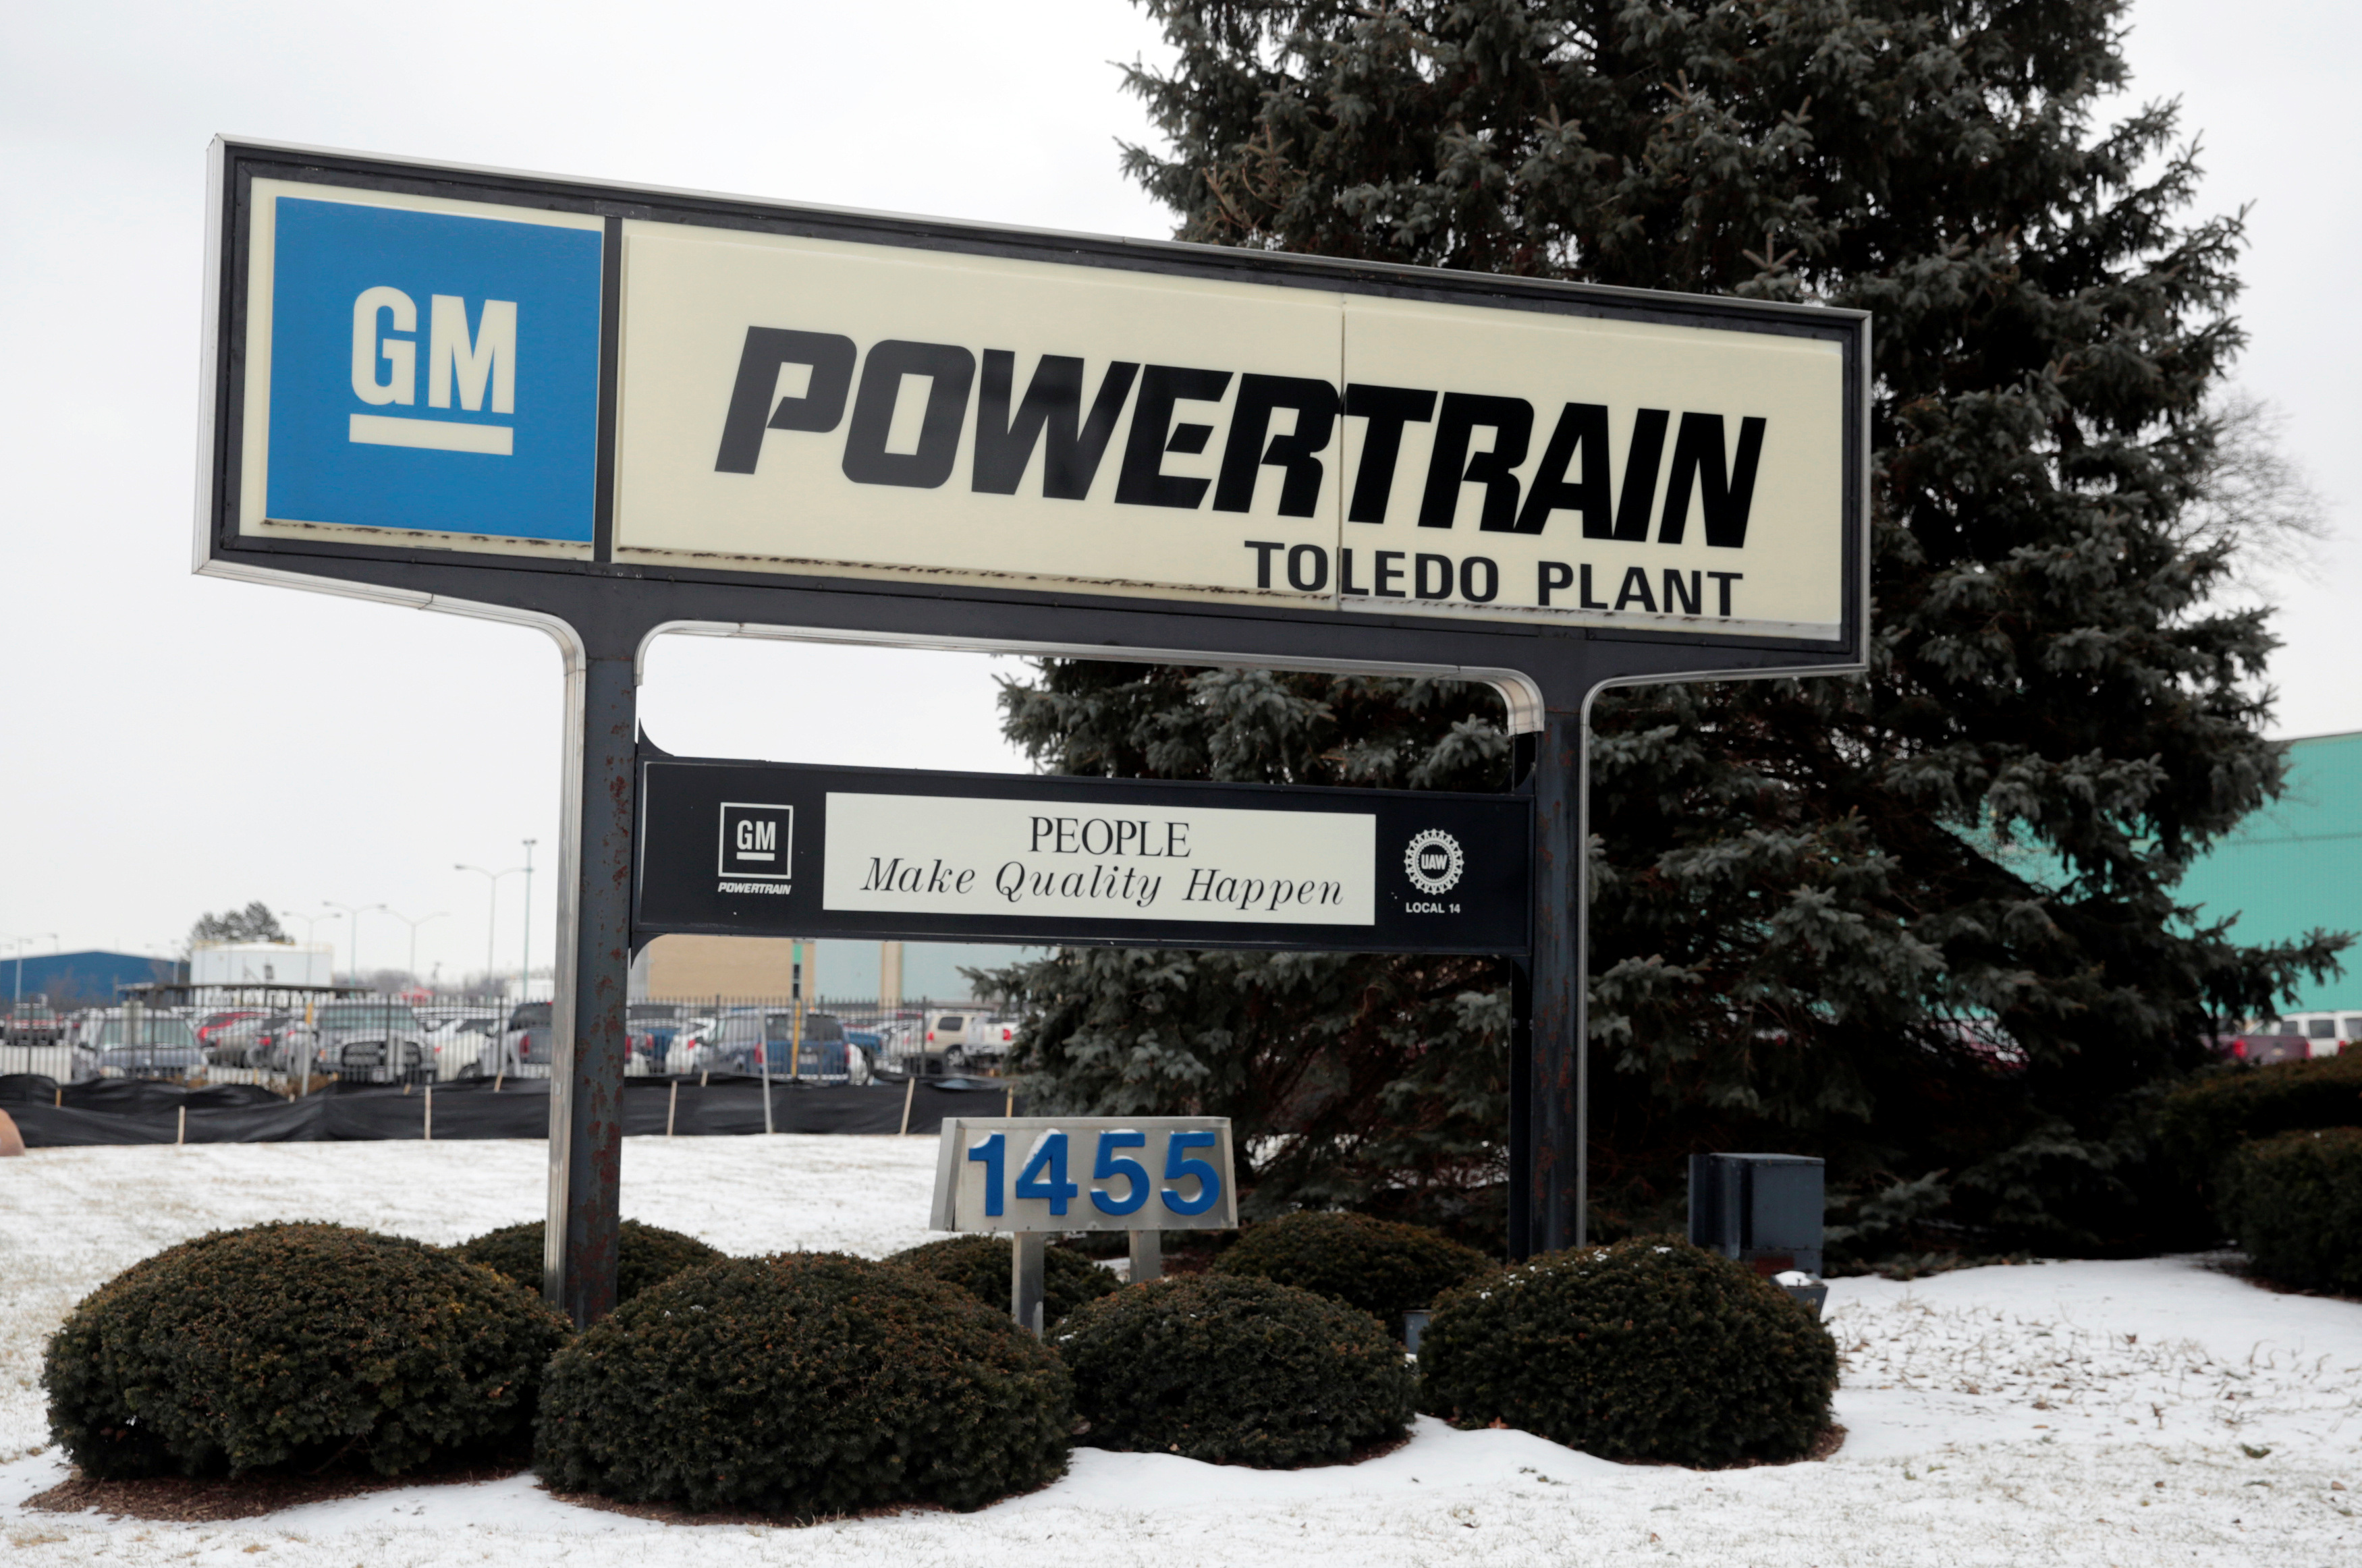 A sign for the General Motors (GM) Powertrain Transmission plant is seen in front of the assembly plant in Toledo Ohio